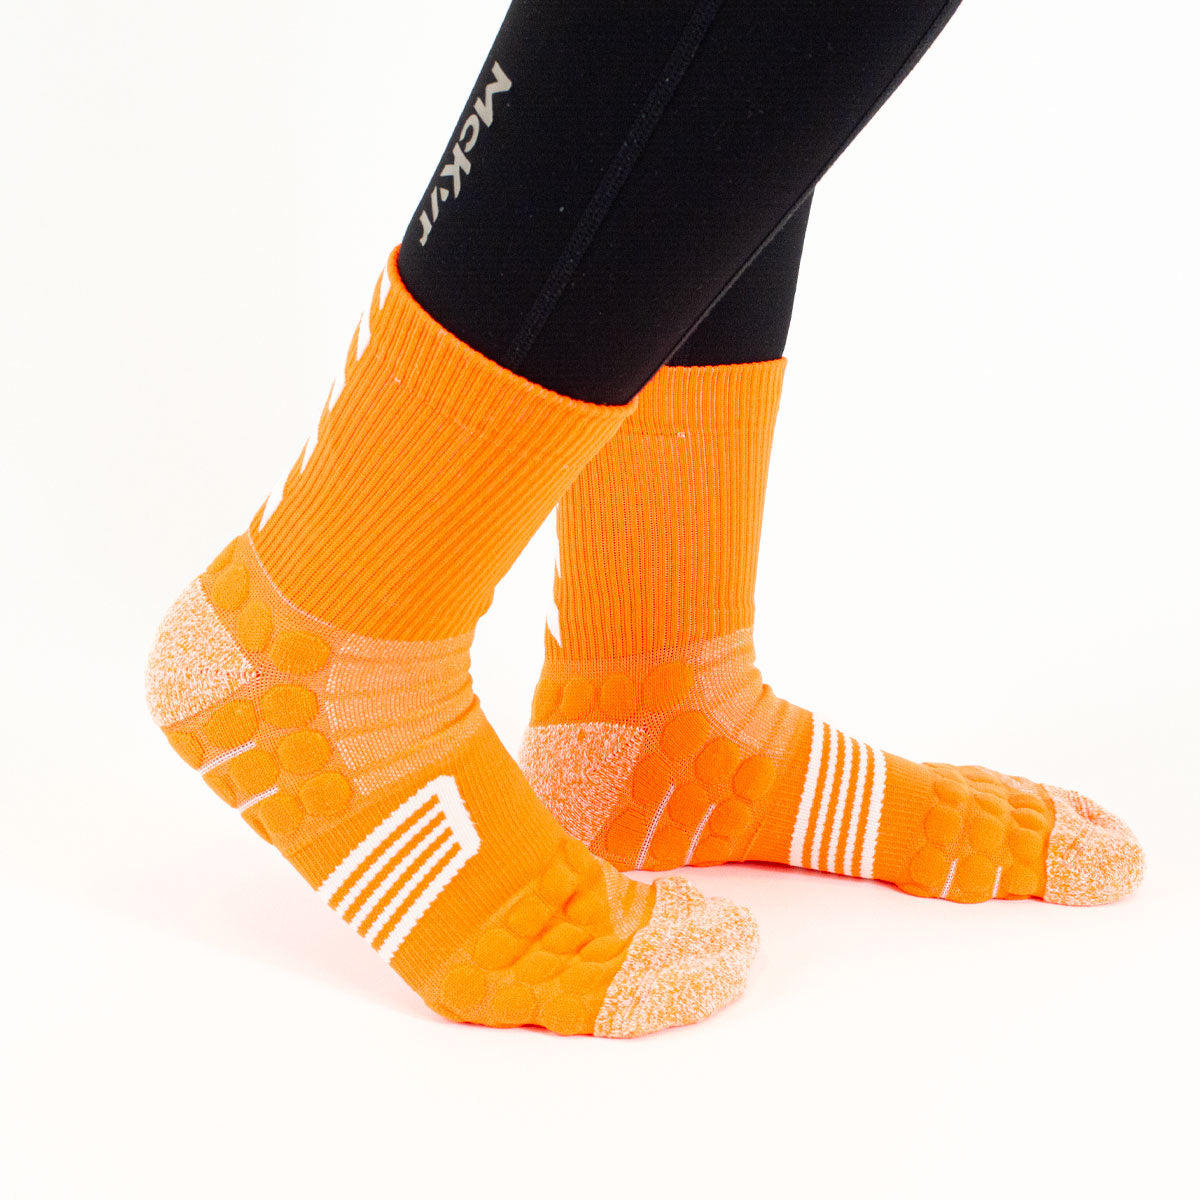 Mc Keever Armagh GAA Official Home Playing Socks - Kids - Orange/White